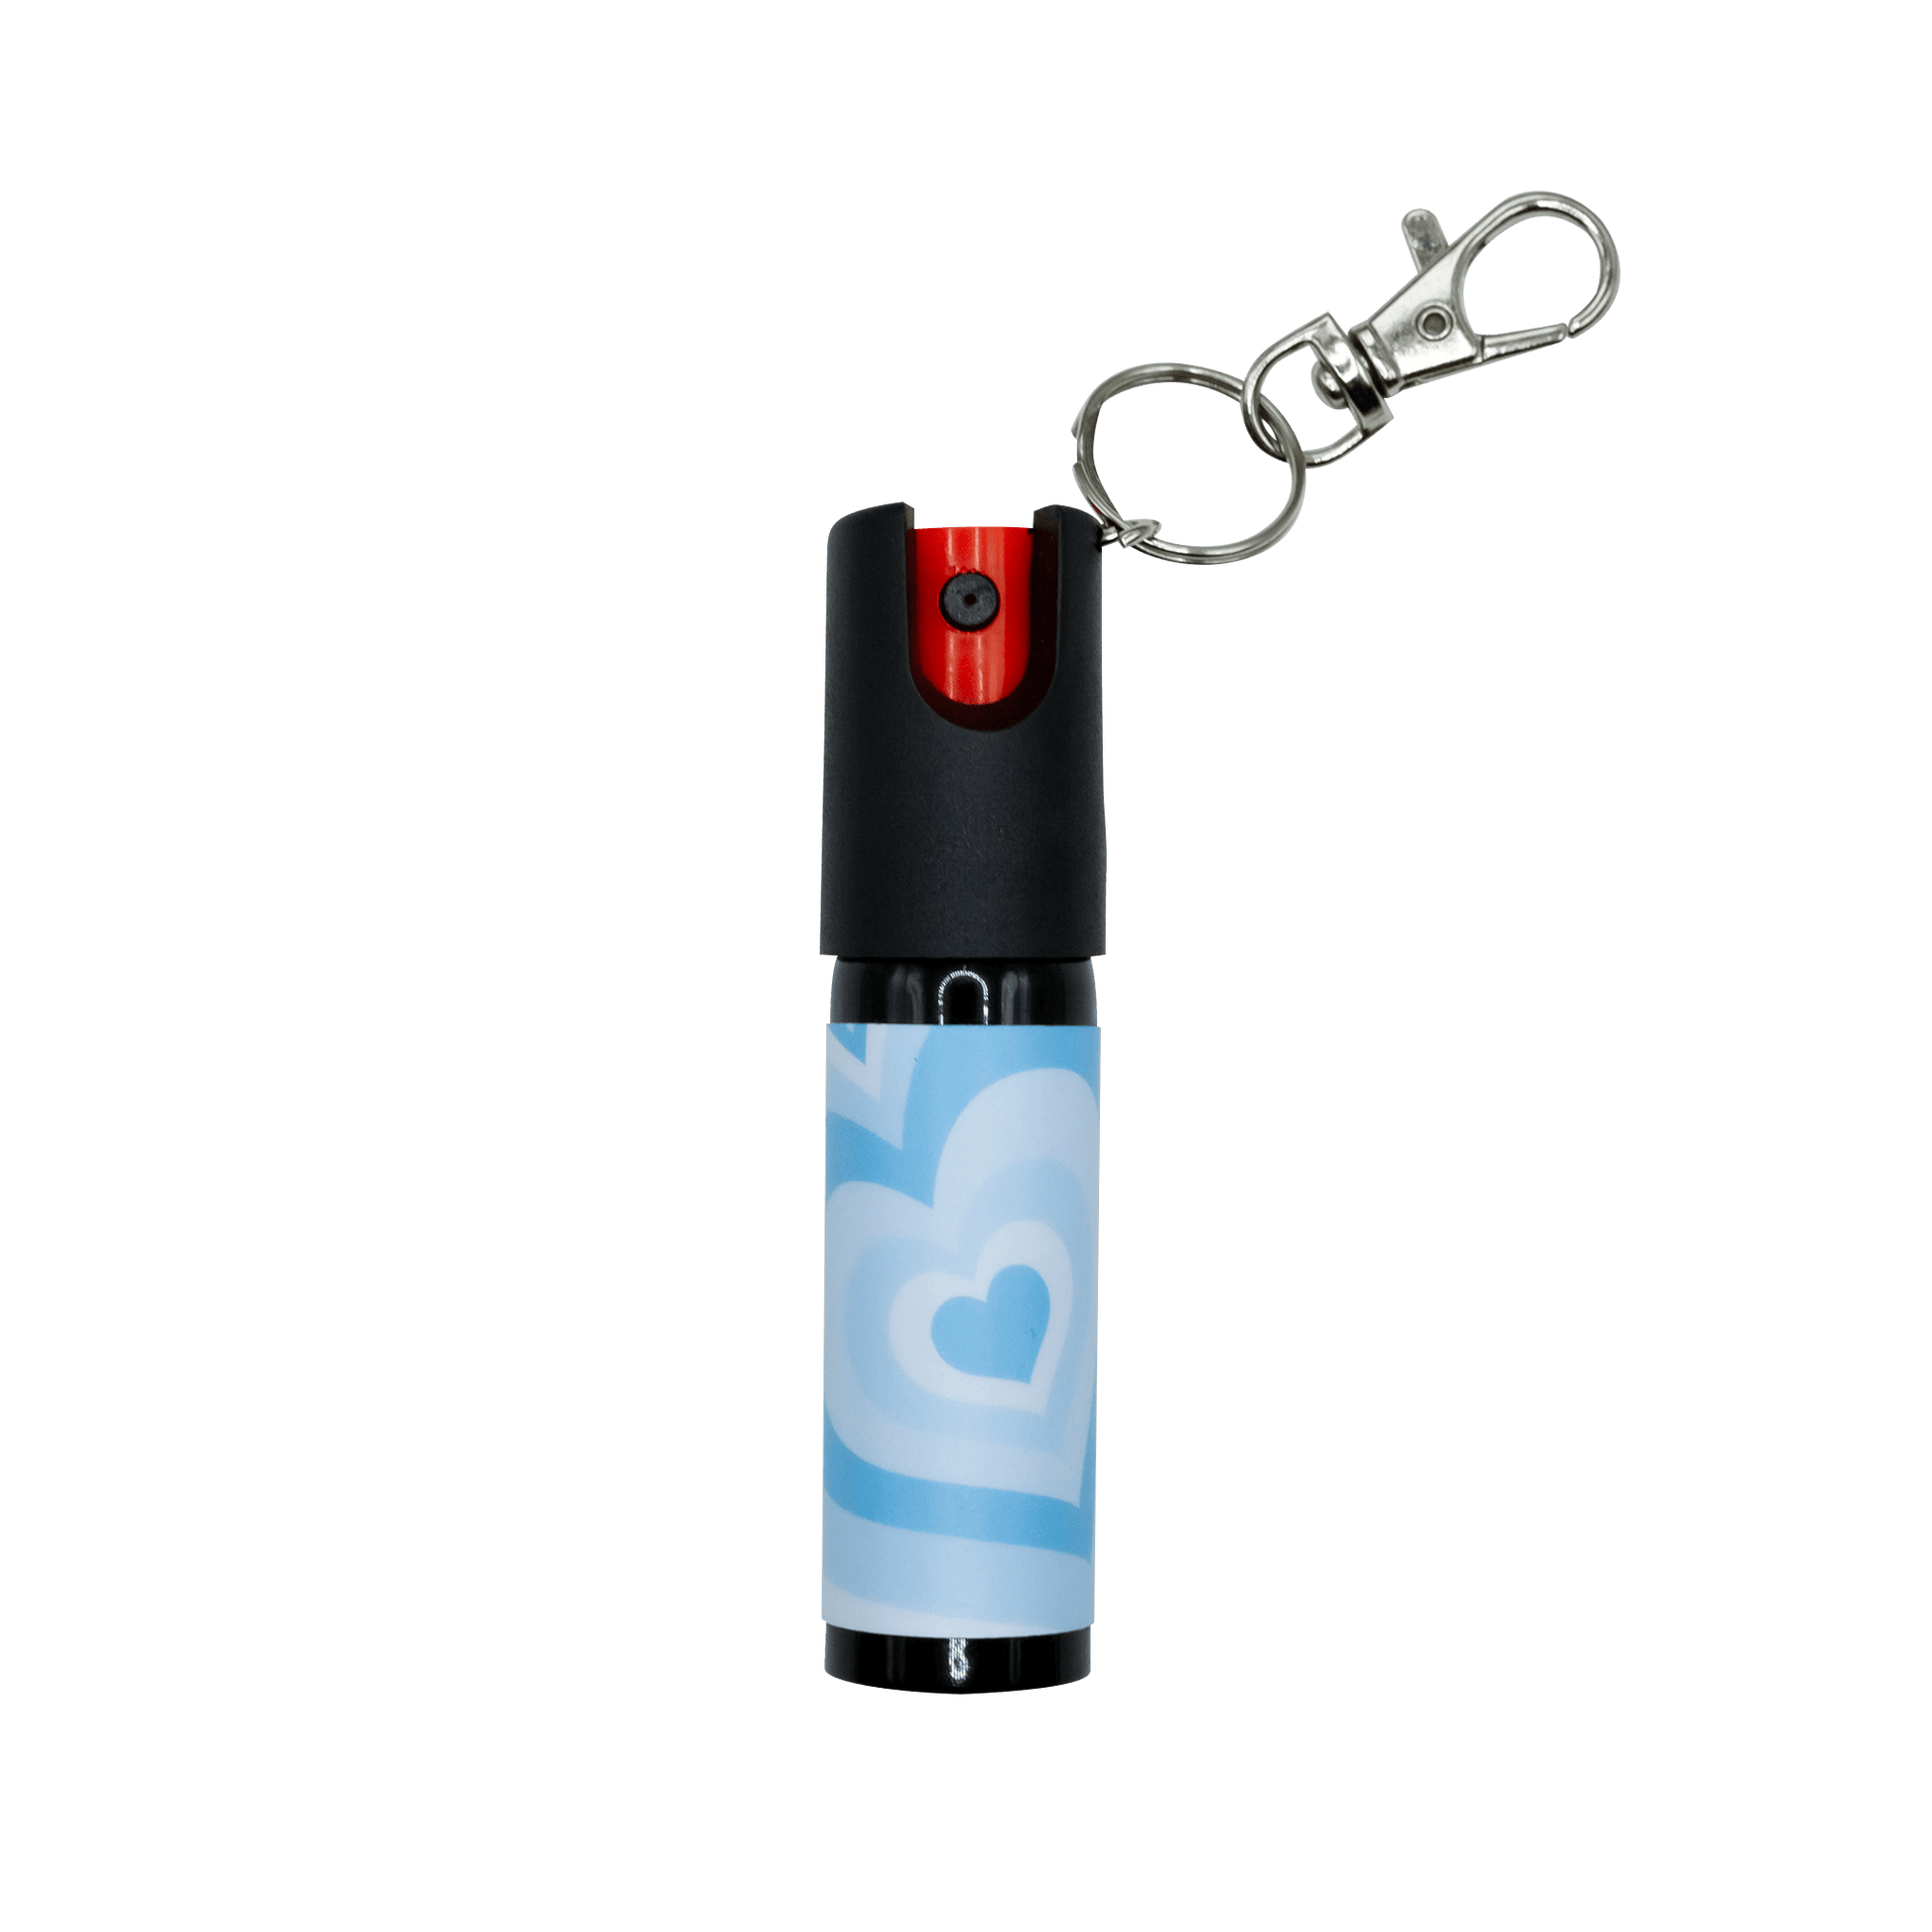 SDK Pepper Spray Blue Hearts (20ml compact Pepper Spray with keychain attachment)